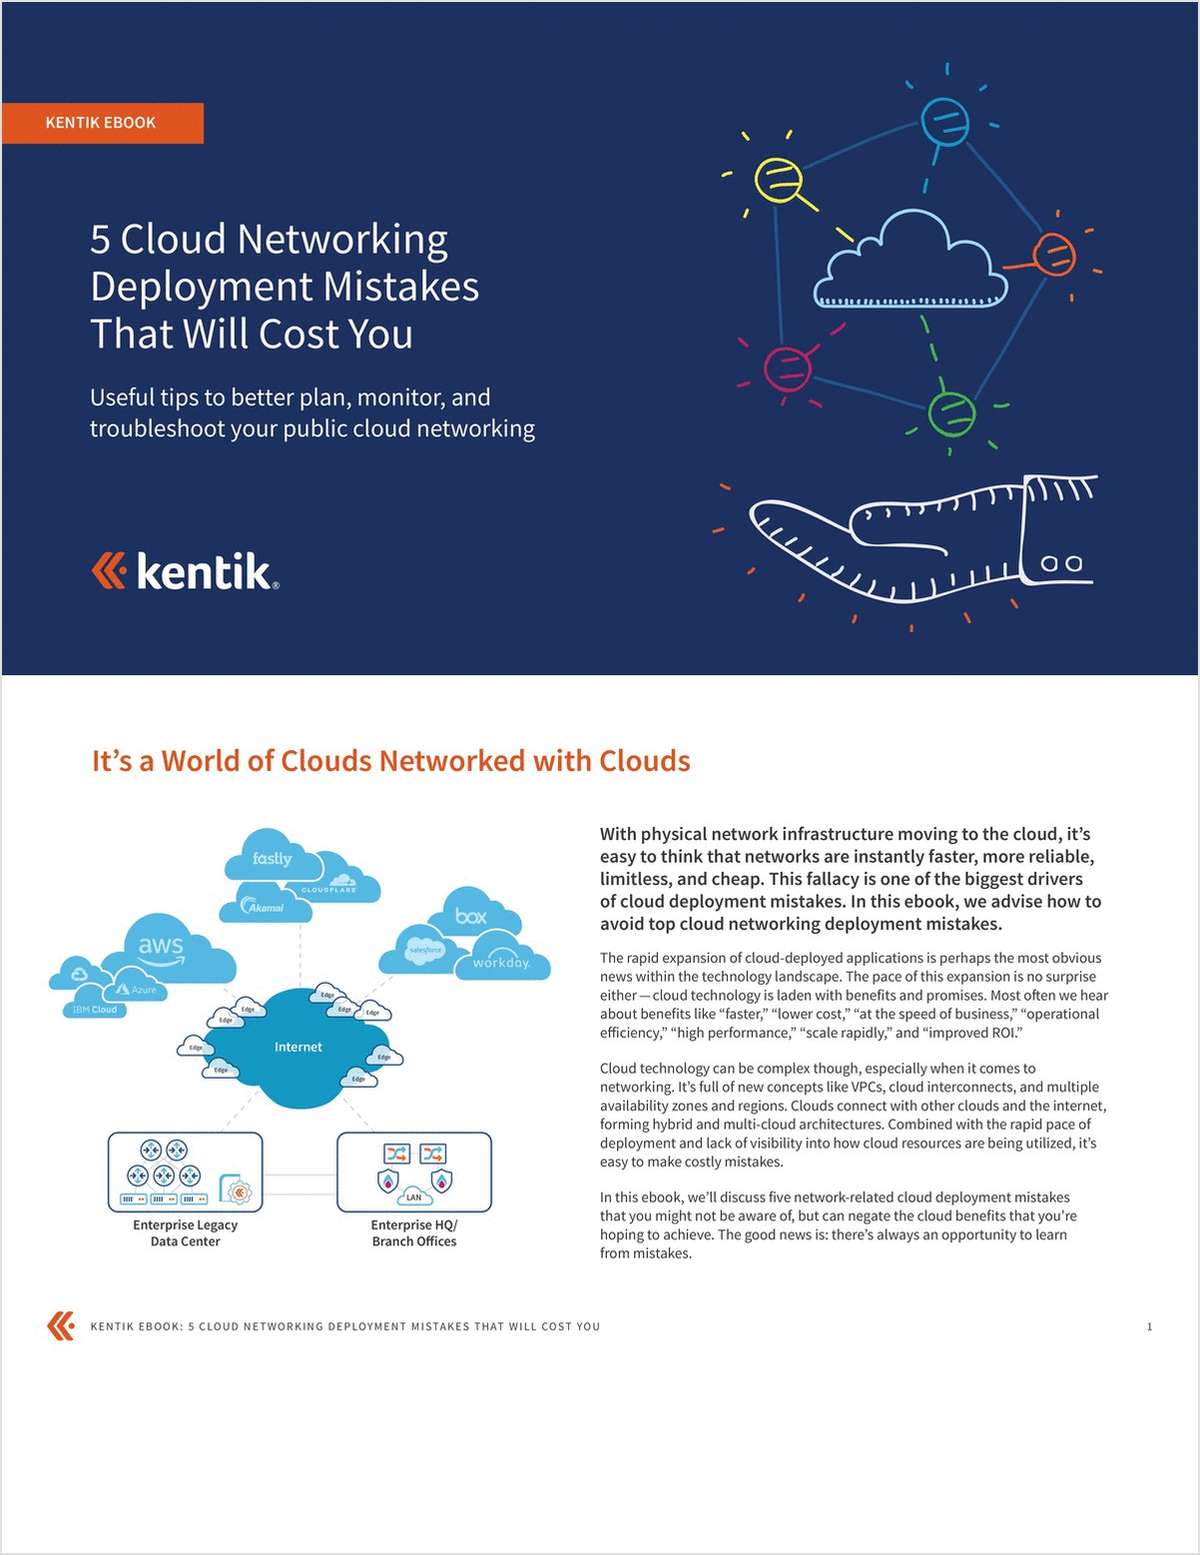 Five Cloud Networking Deployment Mistakes That Will Cost You